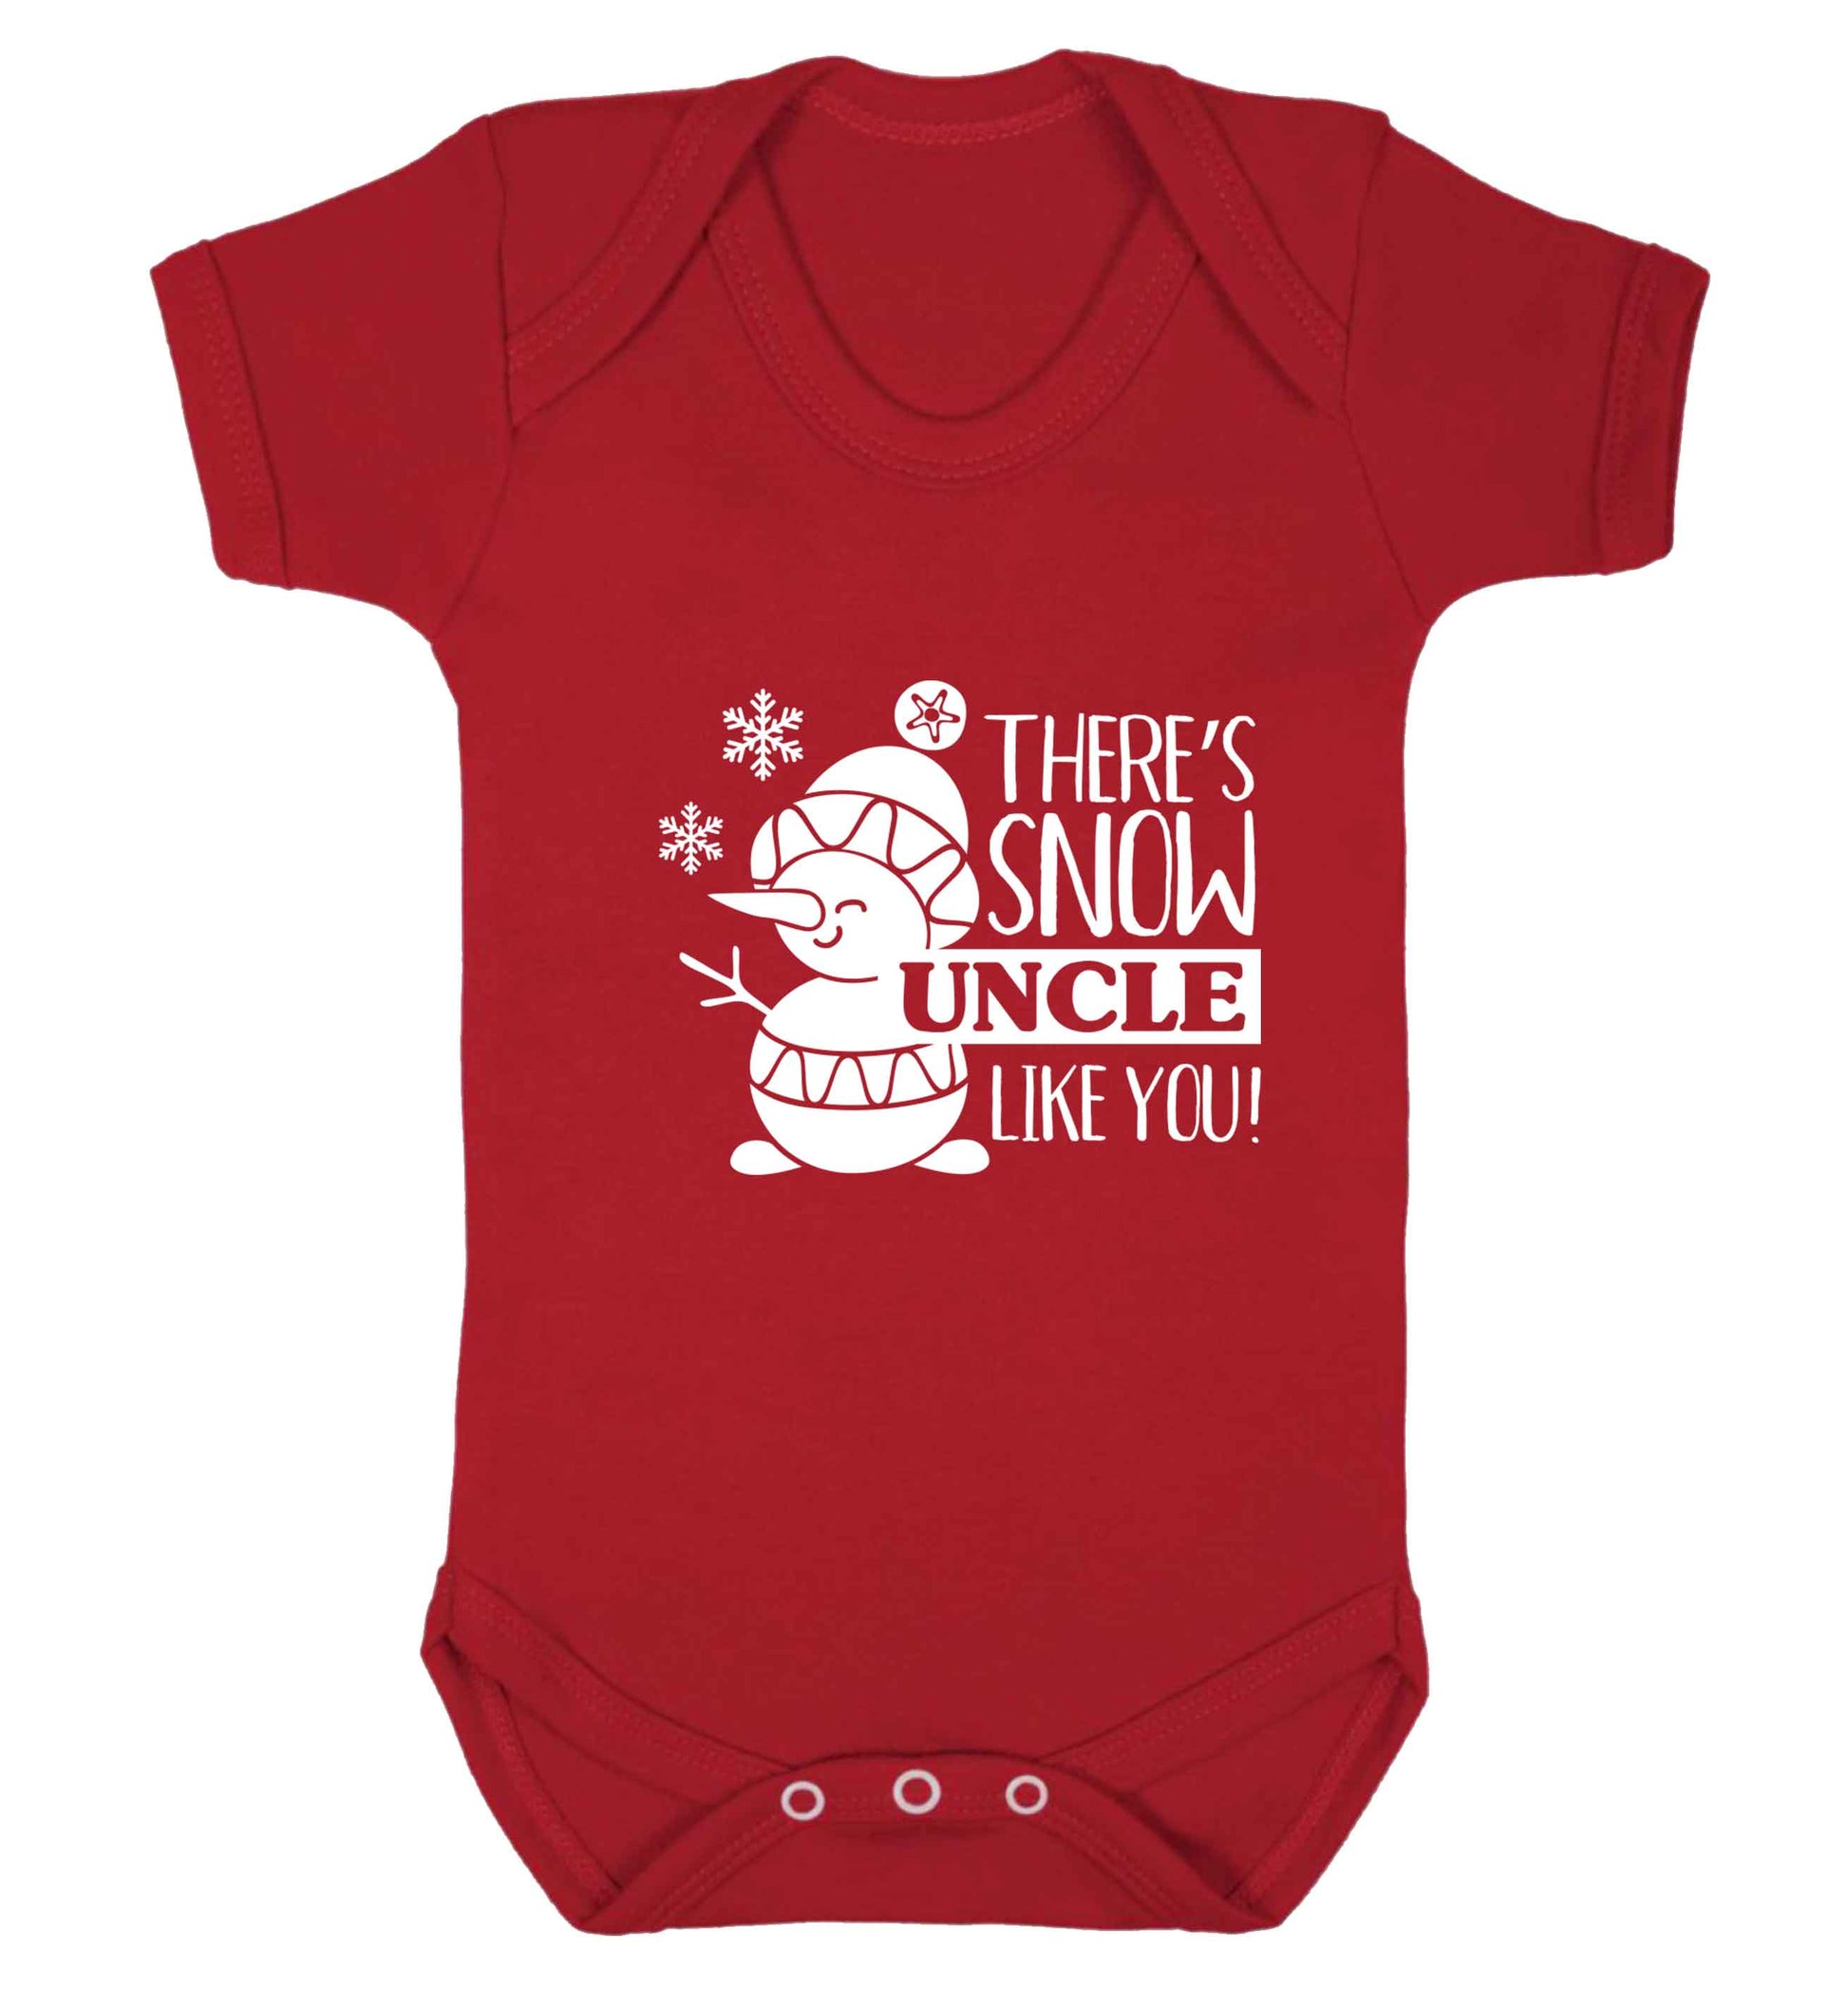 There's snow uncle like you baby vest red 18-24 months